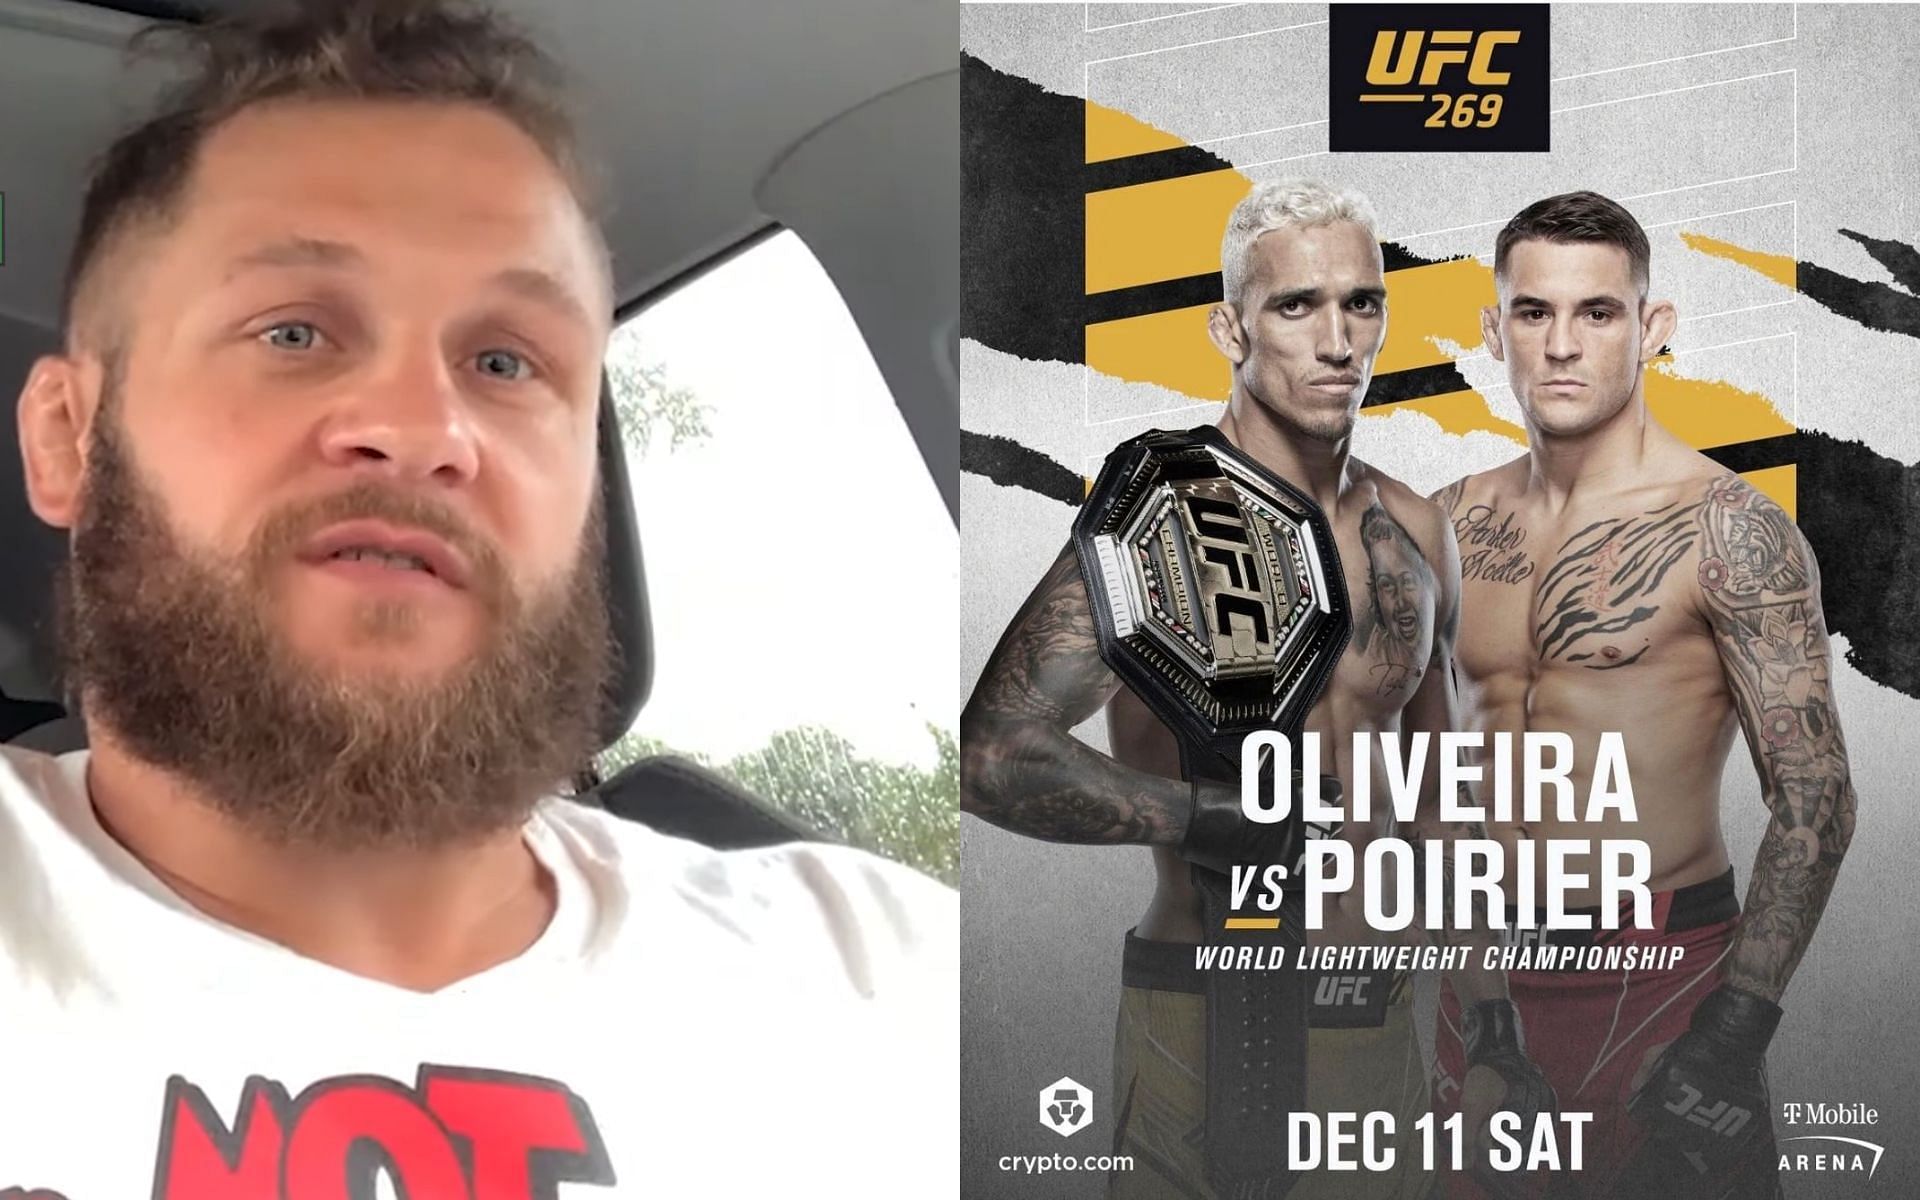 Rafel Fiziev (left) gives his predictions on UFC 269 (image: Youtube/jameslynch); UFC 269 poster shared by @dustinpoirier via. Instagram